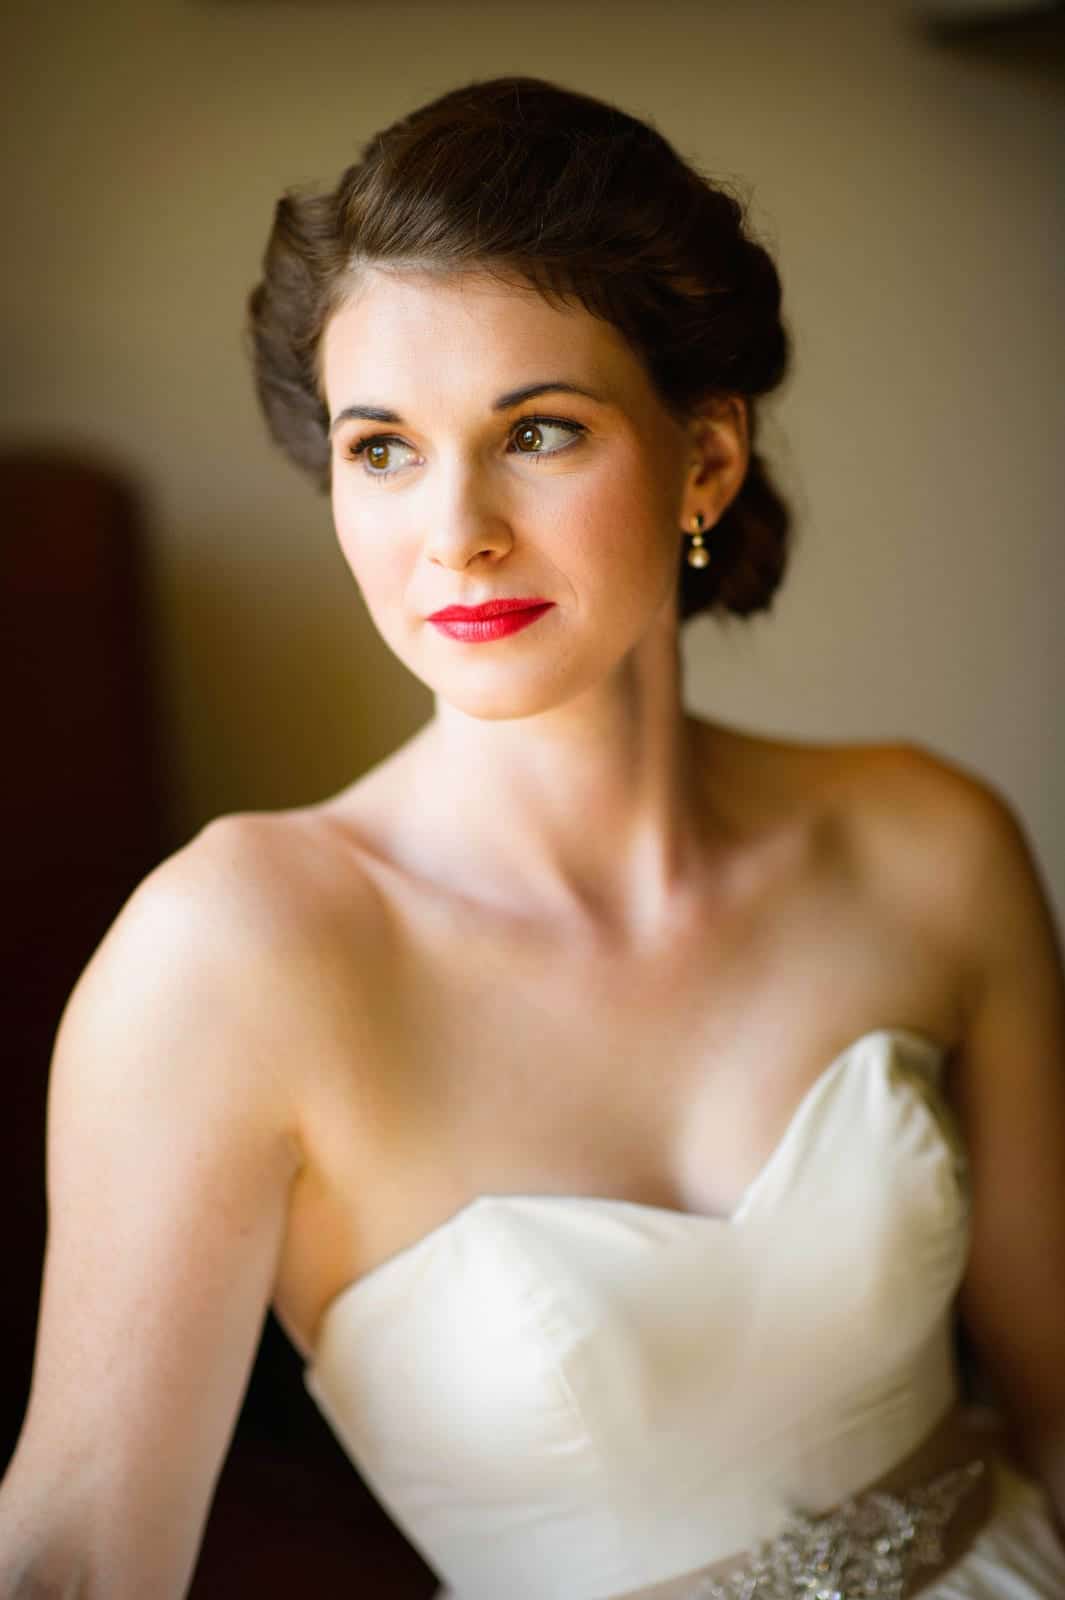 A brunette bride wearing bright red lipstick in a strapless wedding gown looks towards the left side of the frame.